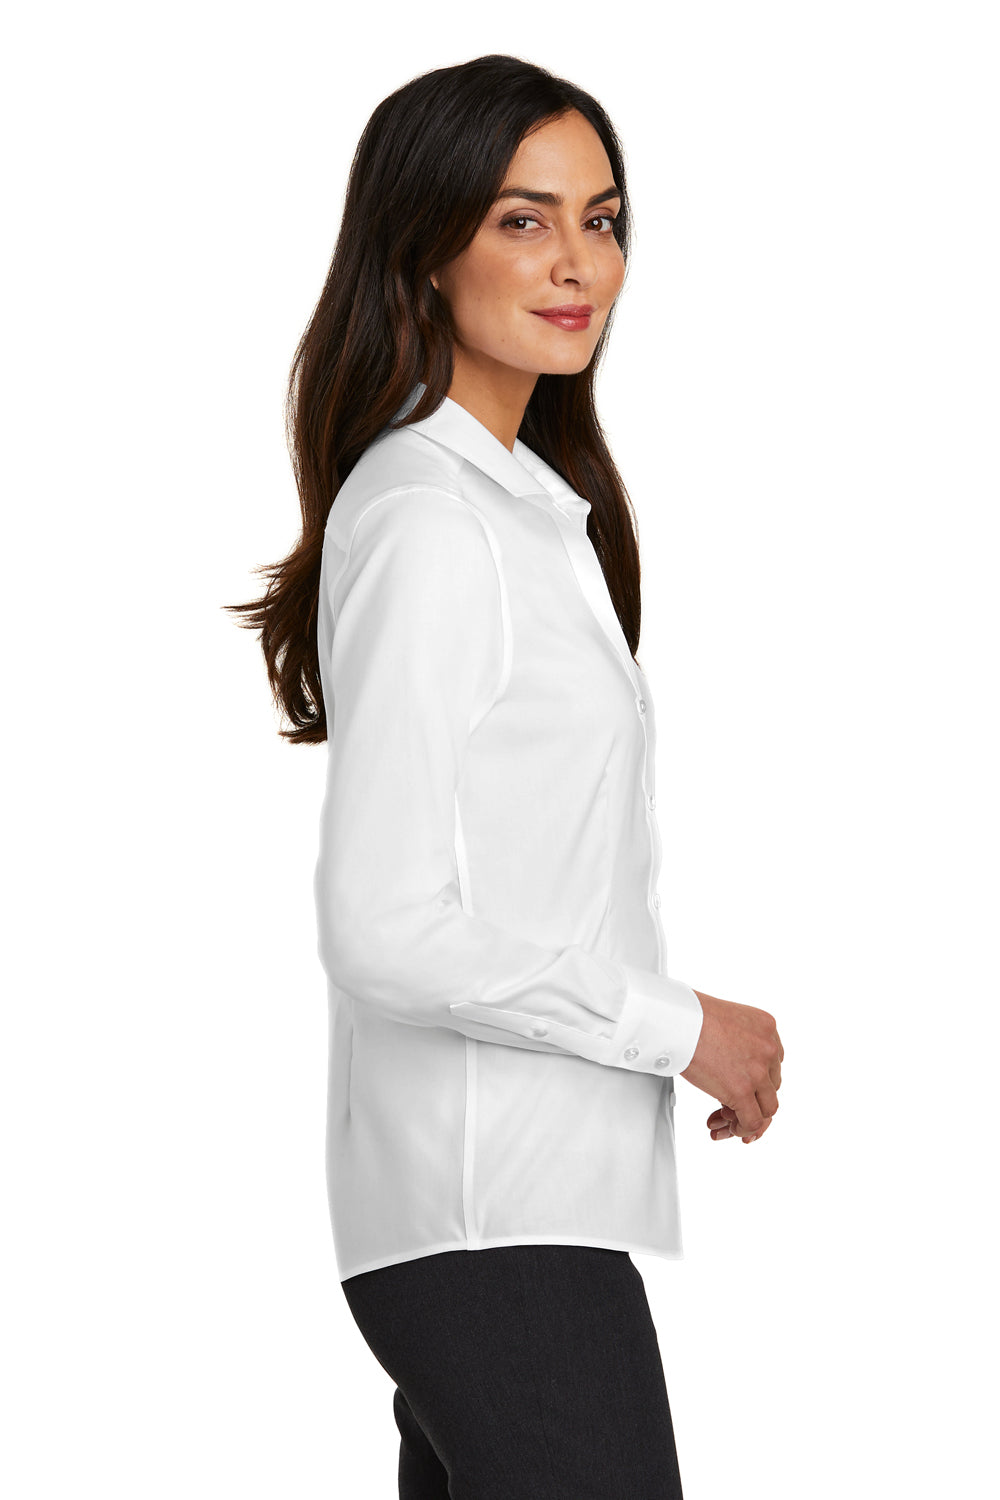 Red House RH250 Womens Pinpoint Oxford Wrinkle Resistant Long Sleeve Button Down Shirt White Side